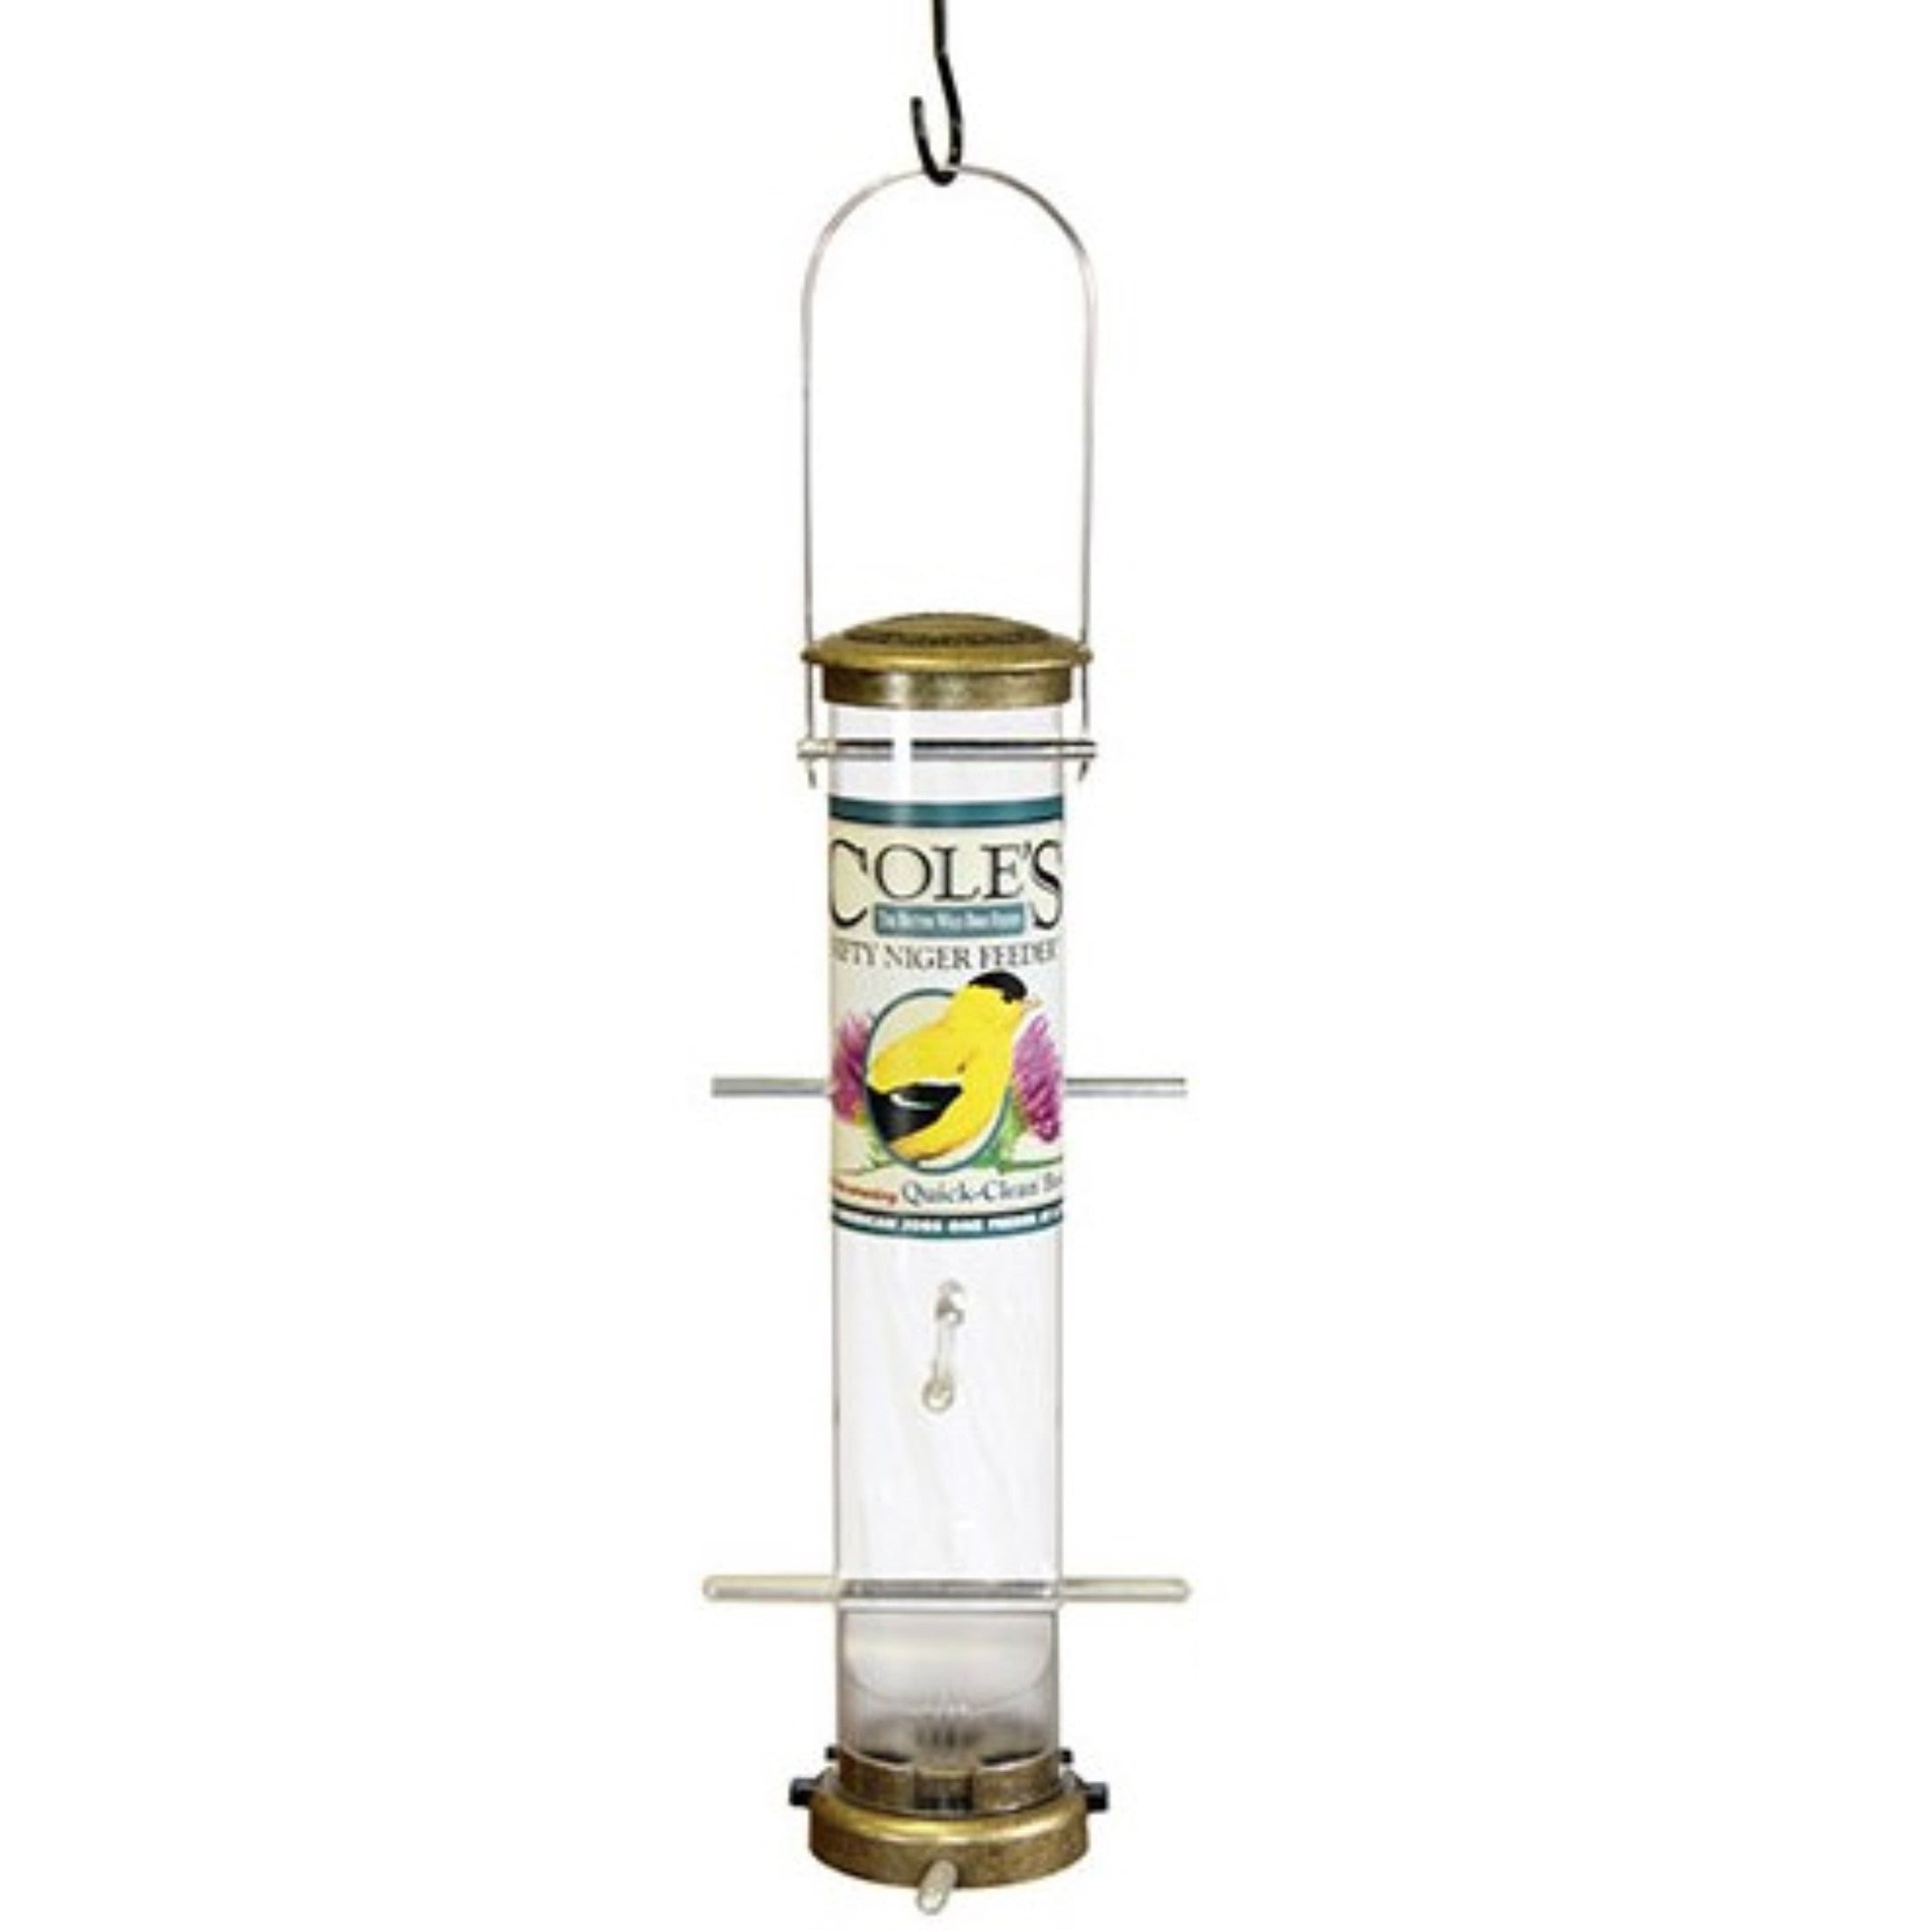 8 port nyjer feeder great for chickadees and finches